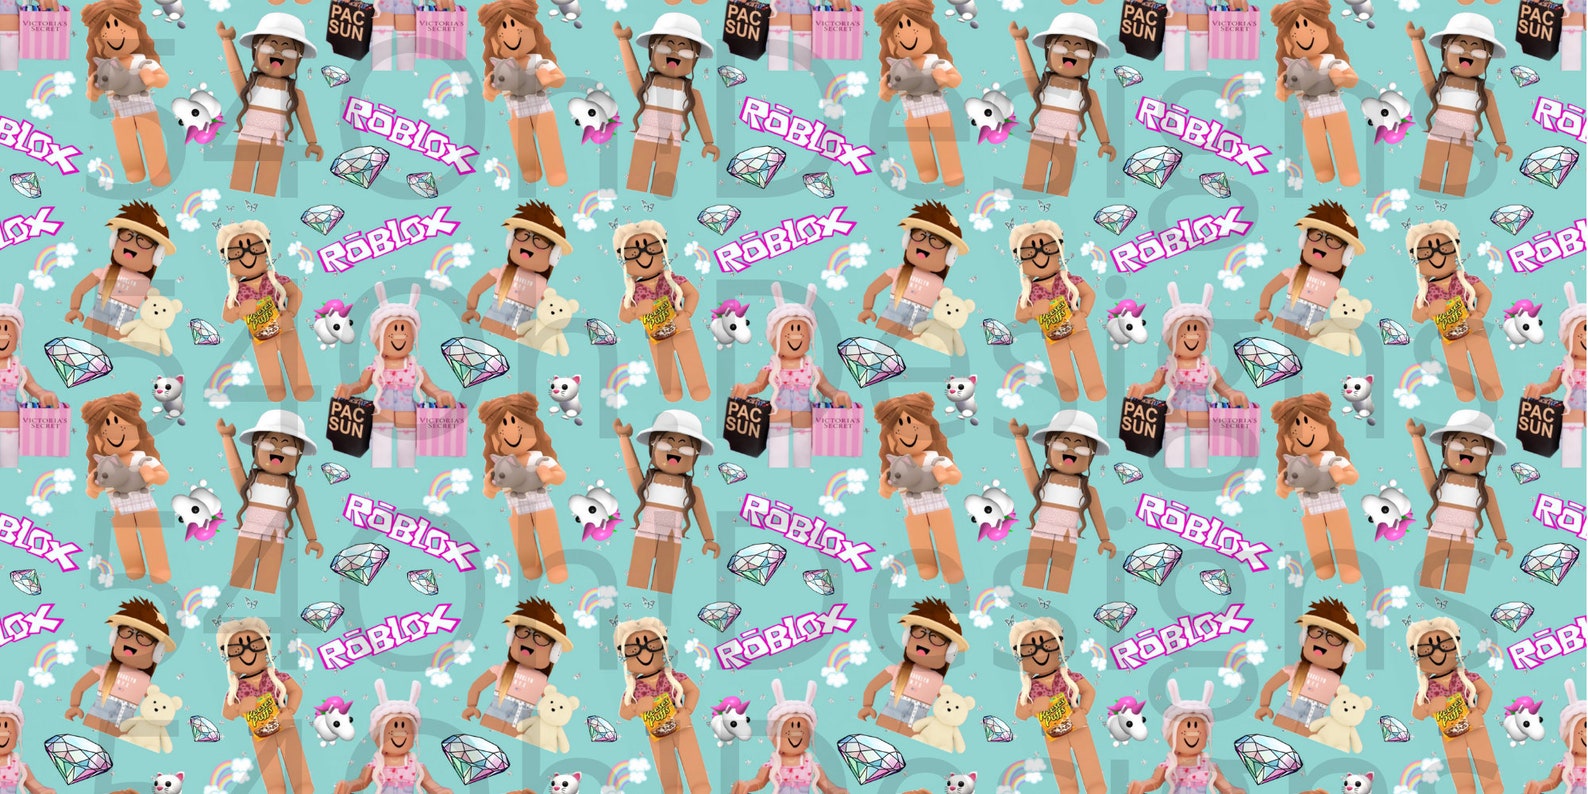 Roblox Girl Seamless Pattern for Your Gamer Girl. Roblox Pattern for ...